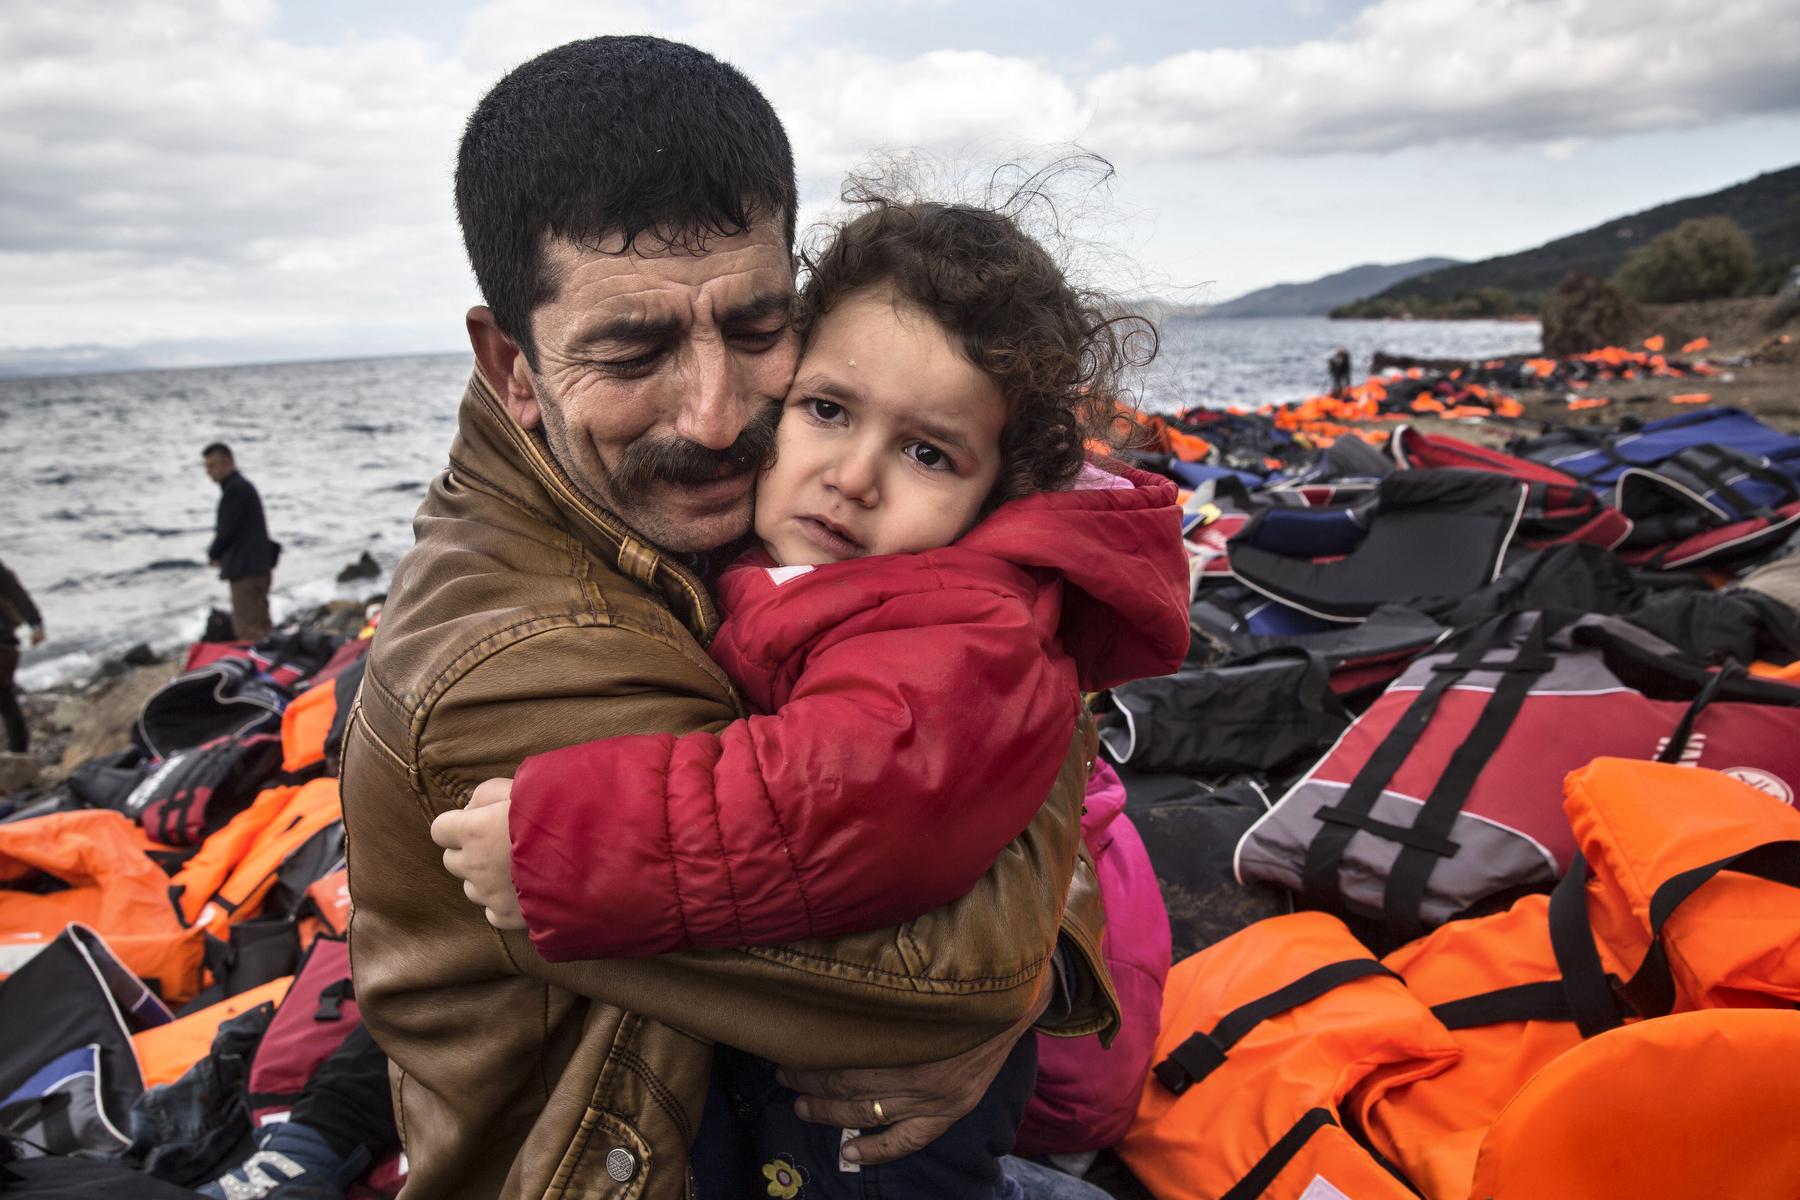 LESBOS, GREECE - OCTOBER 25: An Iraqi refugee cries as he holds his daughter after arriving safely to Lesbos from Turkey. Colder weather and rough seas continue to cause deaths at sea as thousands travel in overcrowded small rafts. According to the IOM, an estimated 100,000 people landed in Greece, an average of almost 4,500 per day in late October and November. Nearly all of those entering Greece on a boat from Turkey are from the war zones of Syria, Iraq and Afghanistan. (Photo by Paula Bronstein)